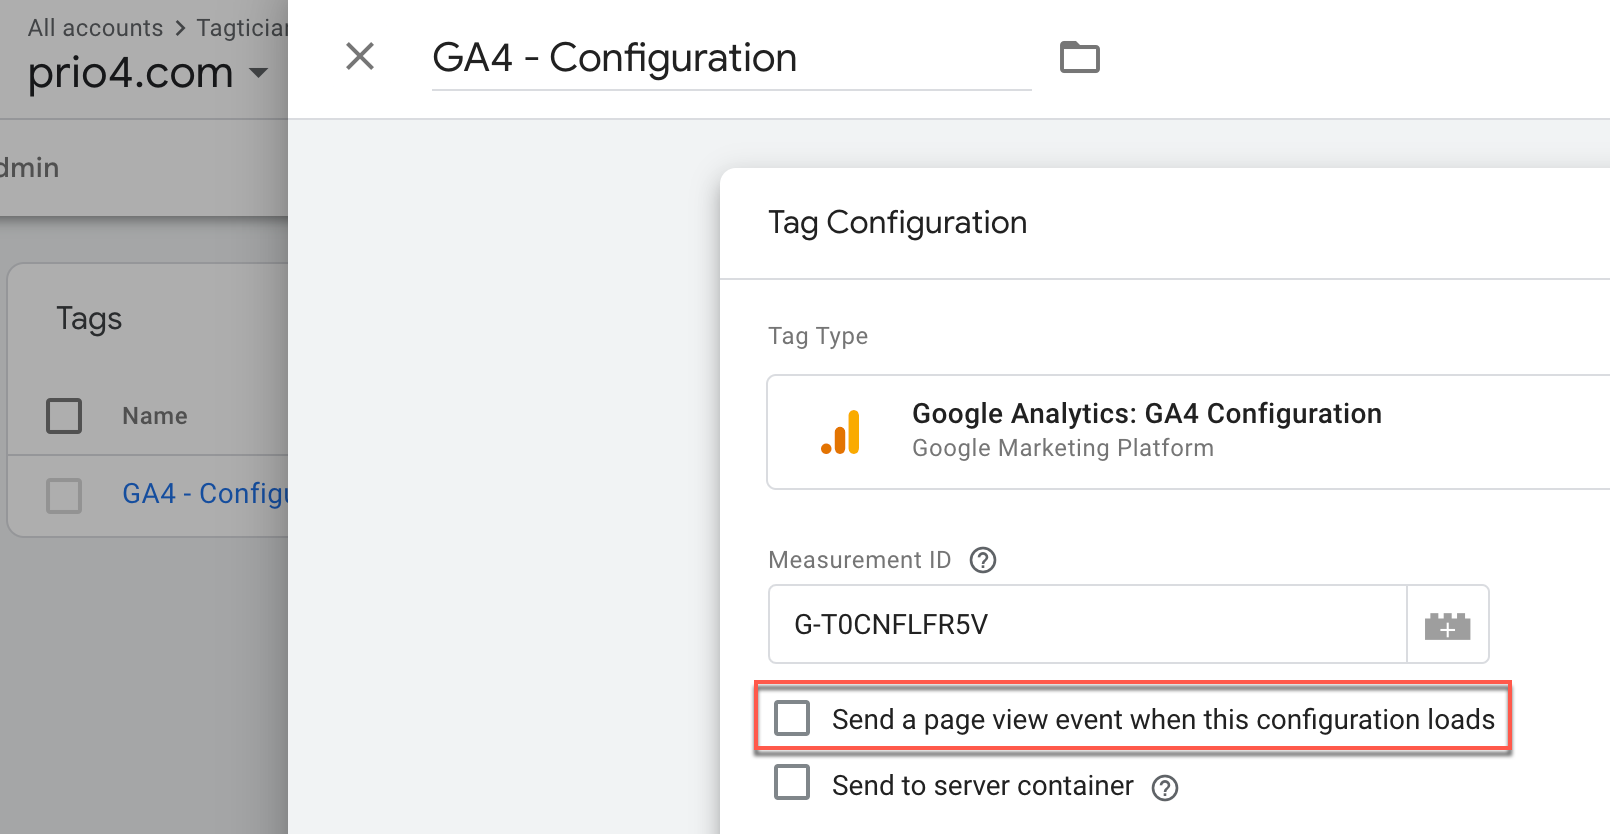 Disable the Send Page View option in the GA4 Configuration tag